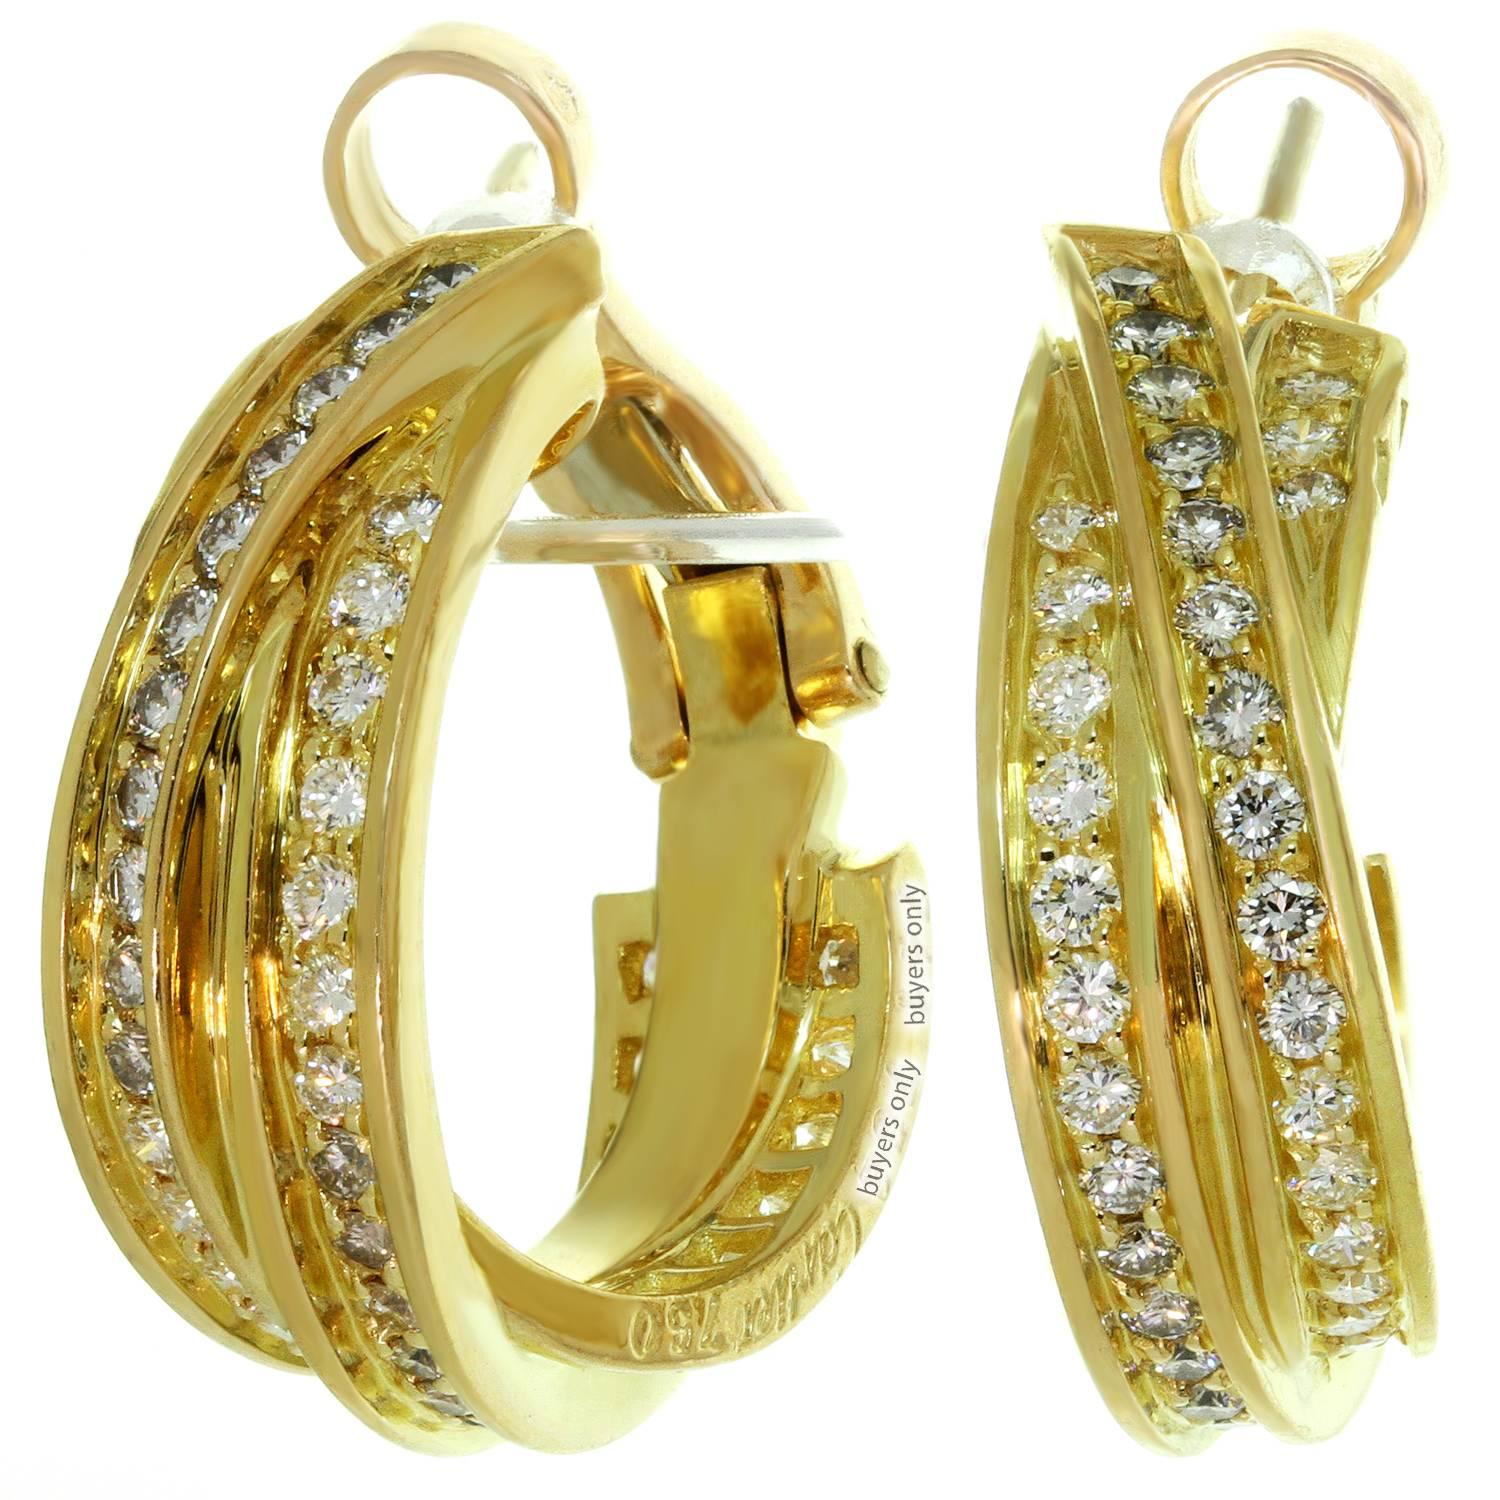 These stunning Cartier earrings from the classic Trinity de Cartier collection feature a half-hoop lever-back design with three interlocking bands crafted in 18k yellow gold and set with high-grade brilliant-cut round diamonds of an estimated 1.23